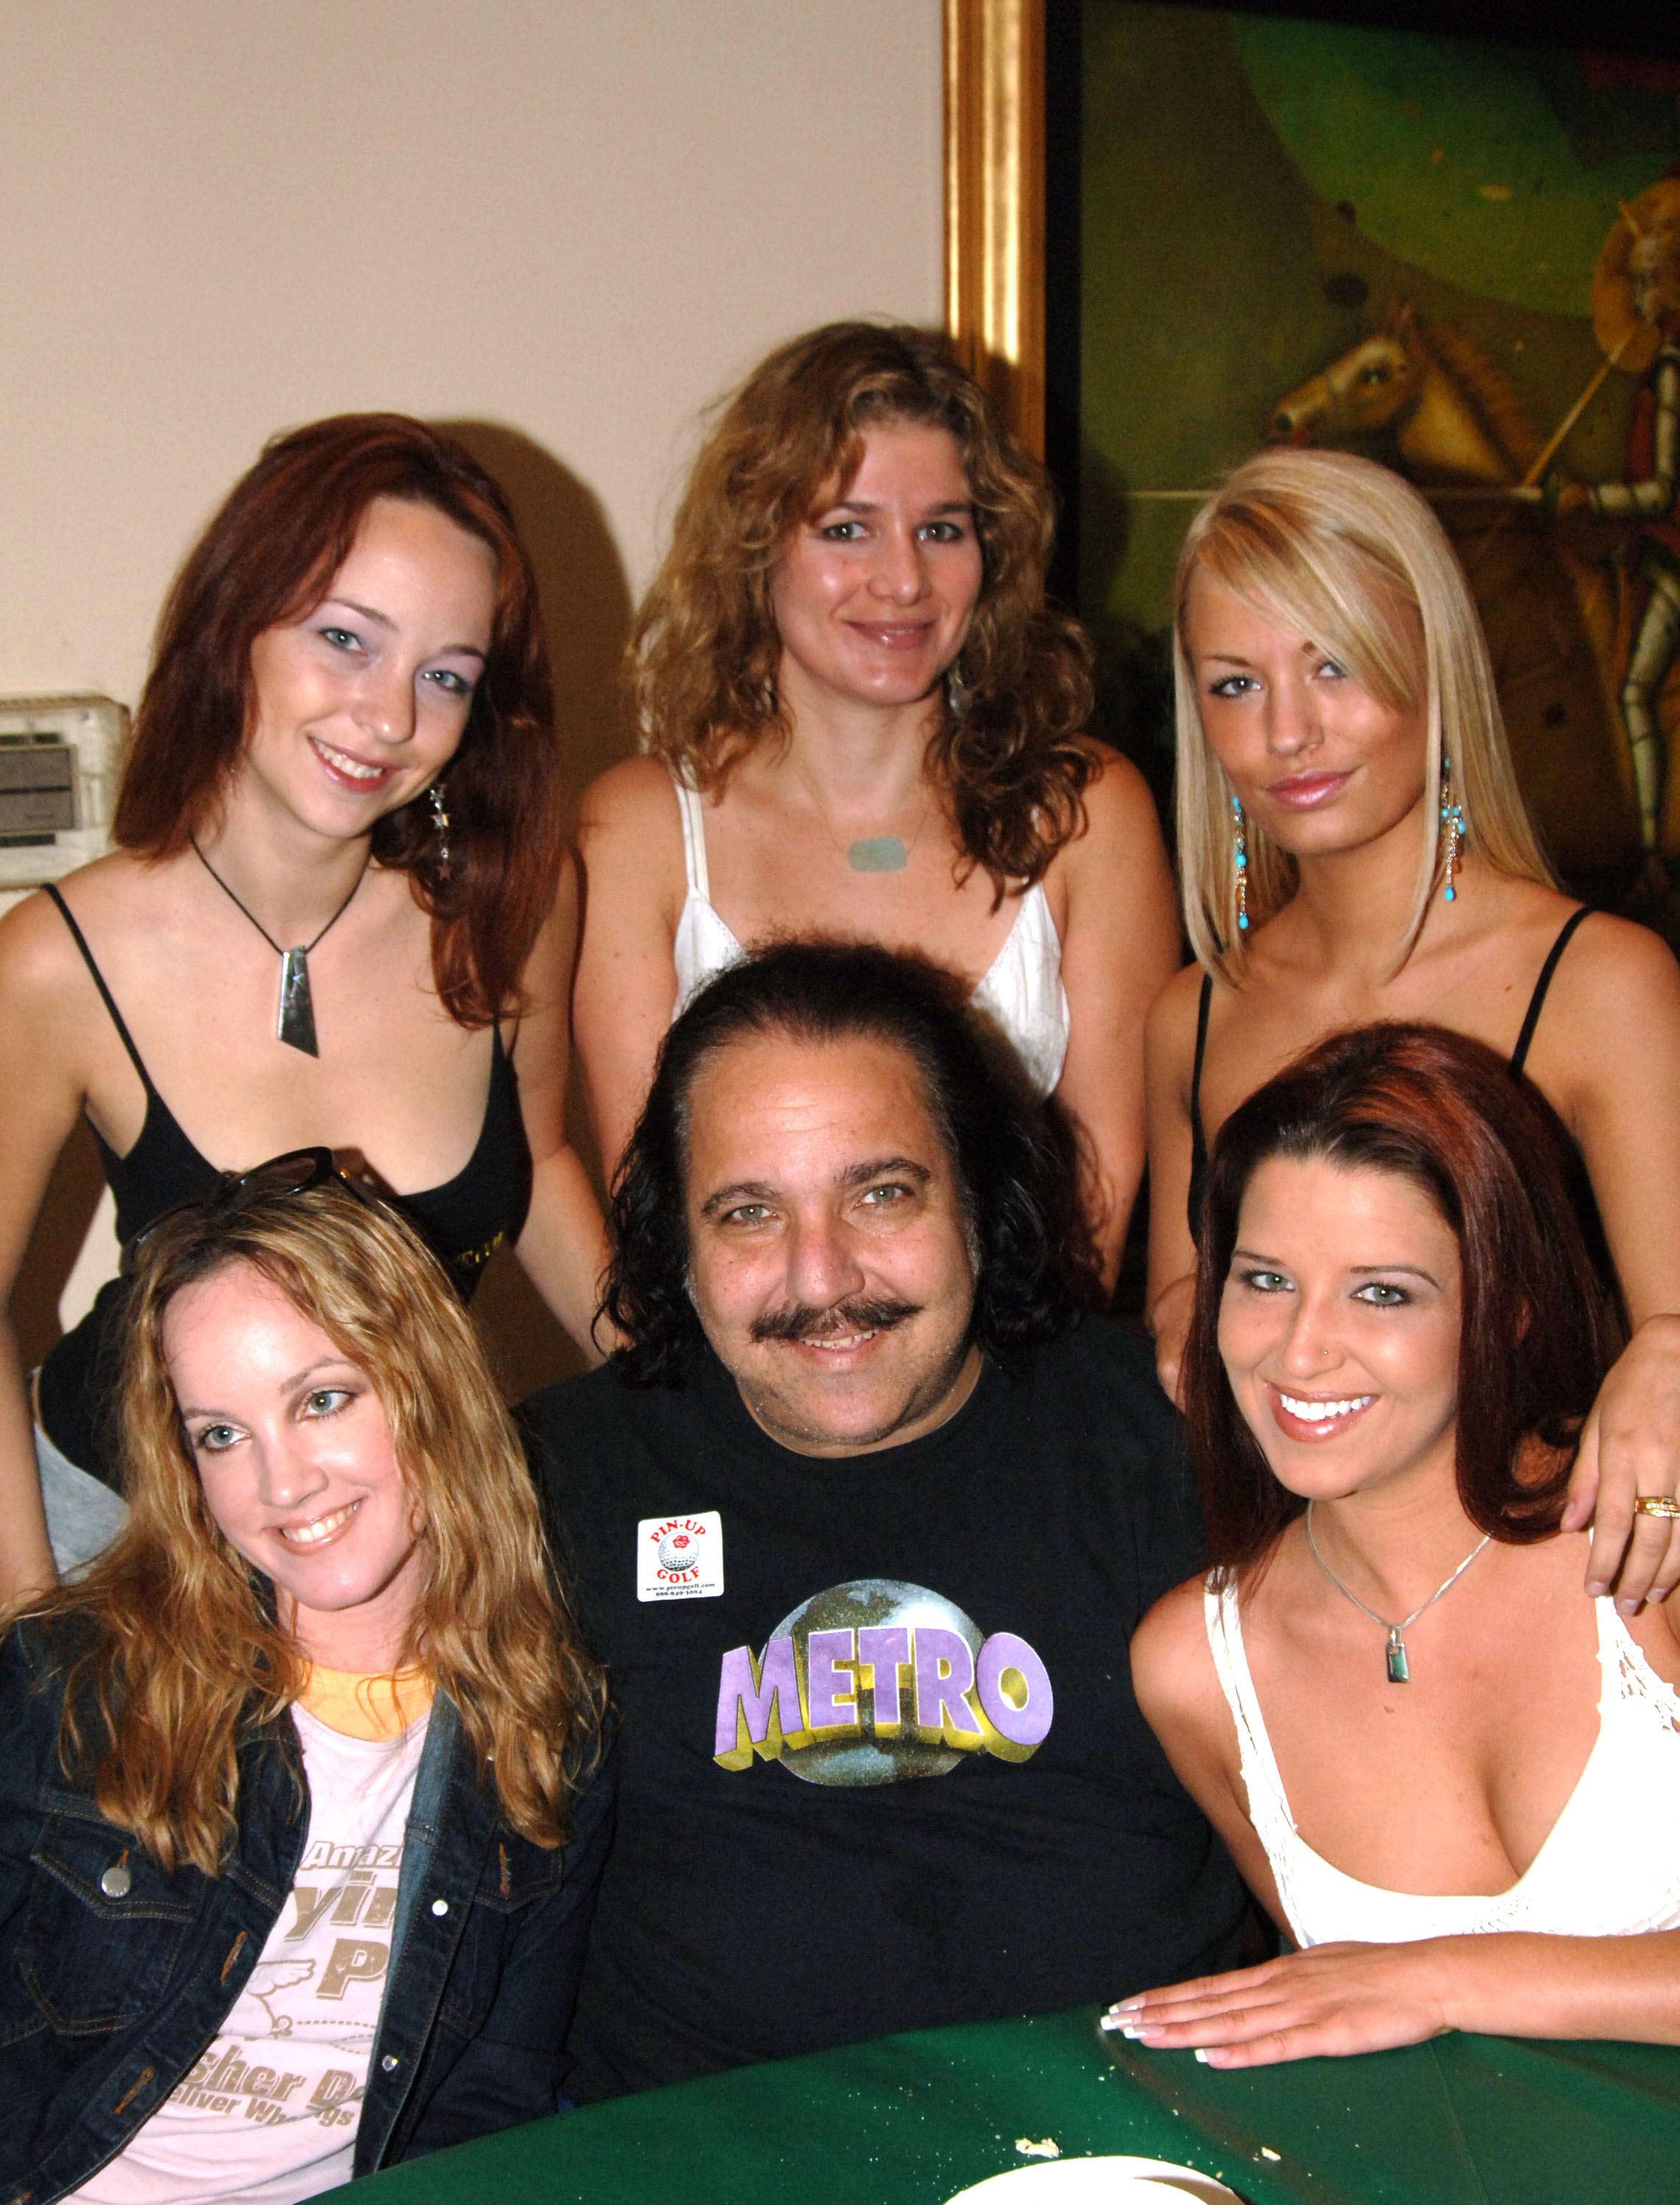 billy shears add ron jeremy when he was young photo